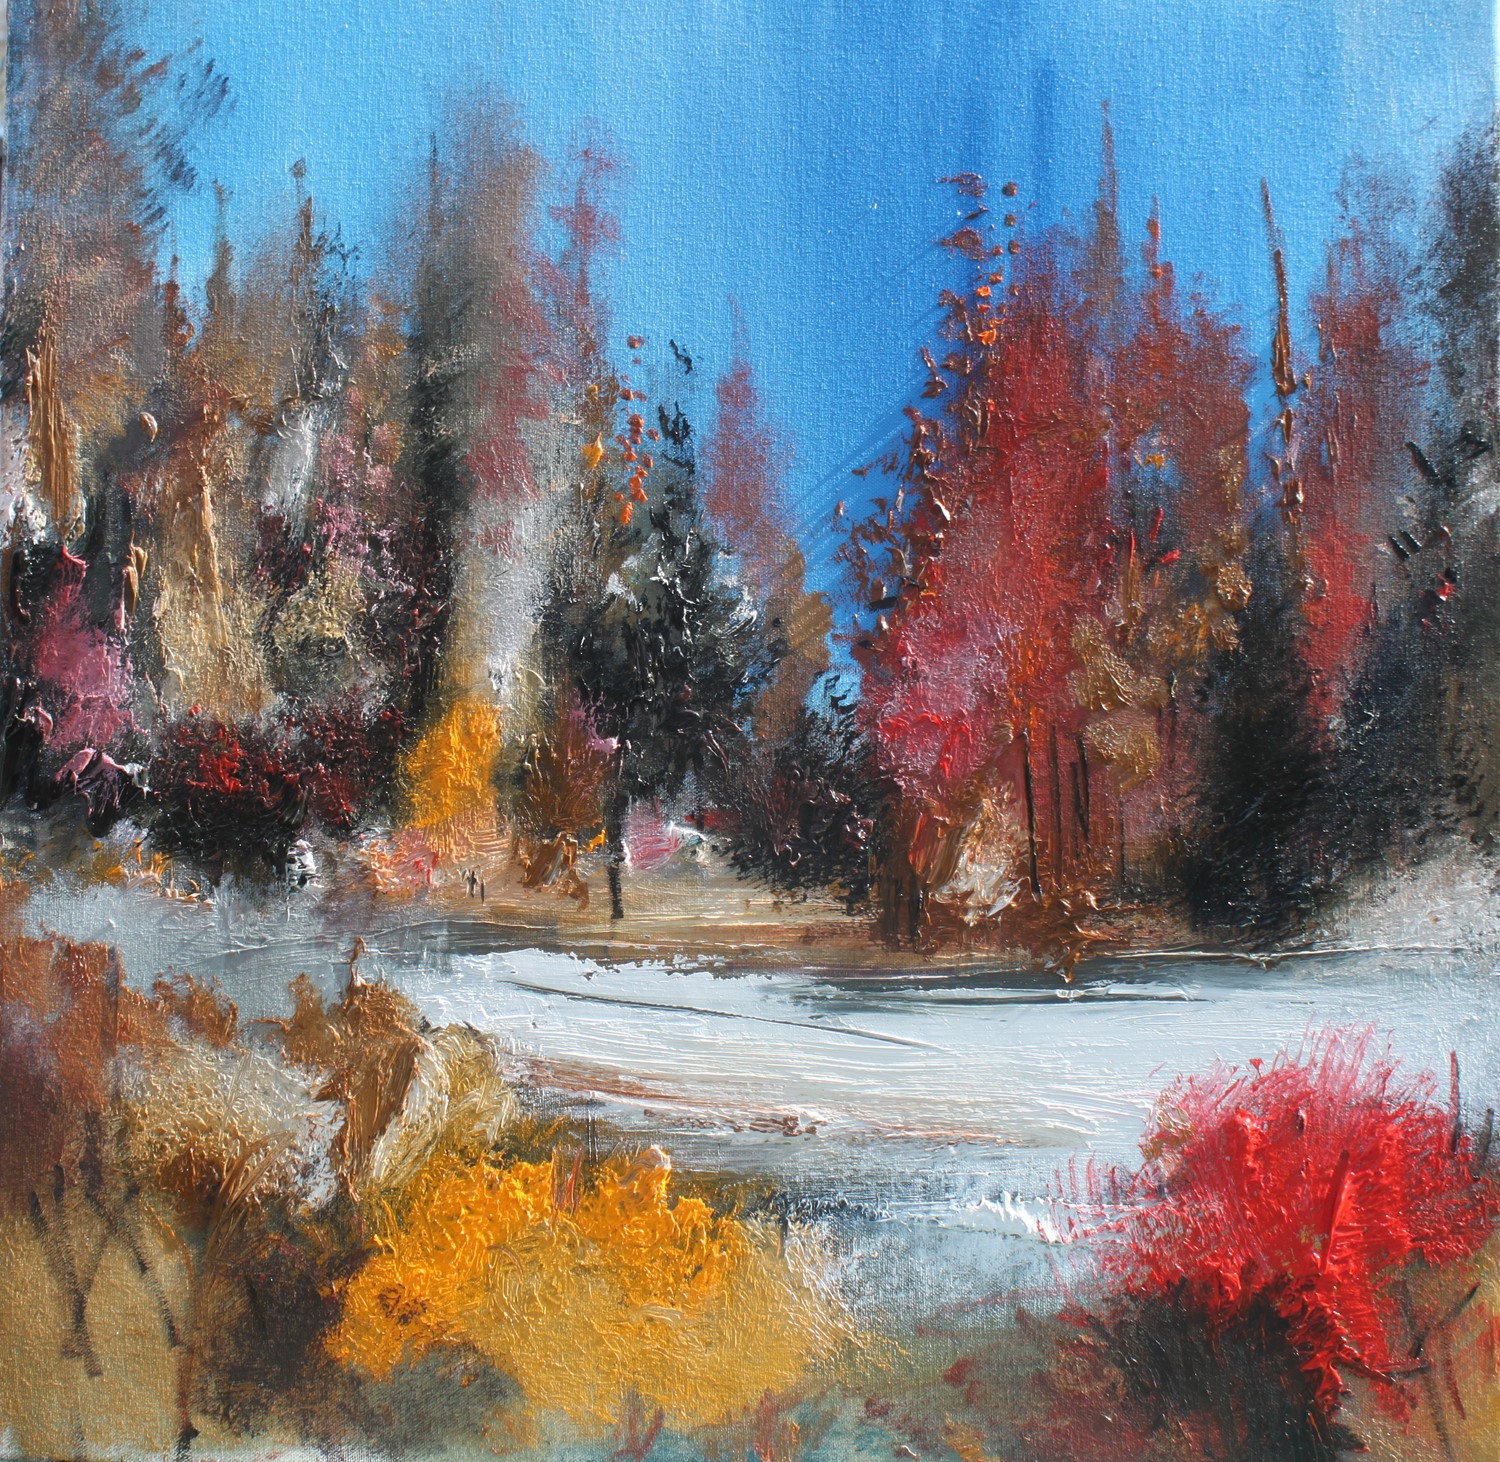 'The First Fall' by artist Rosanne Barr